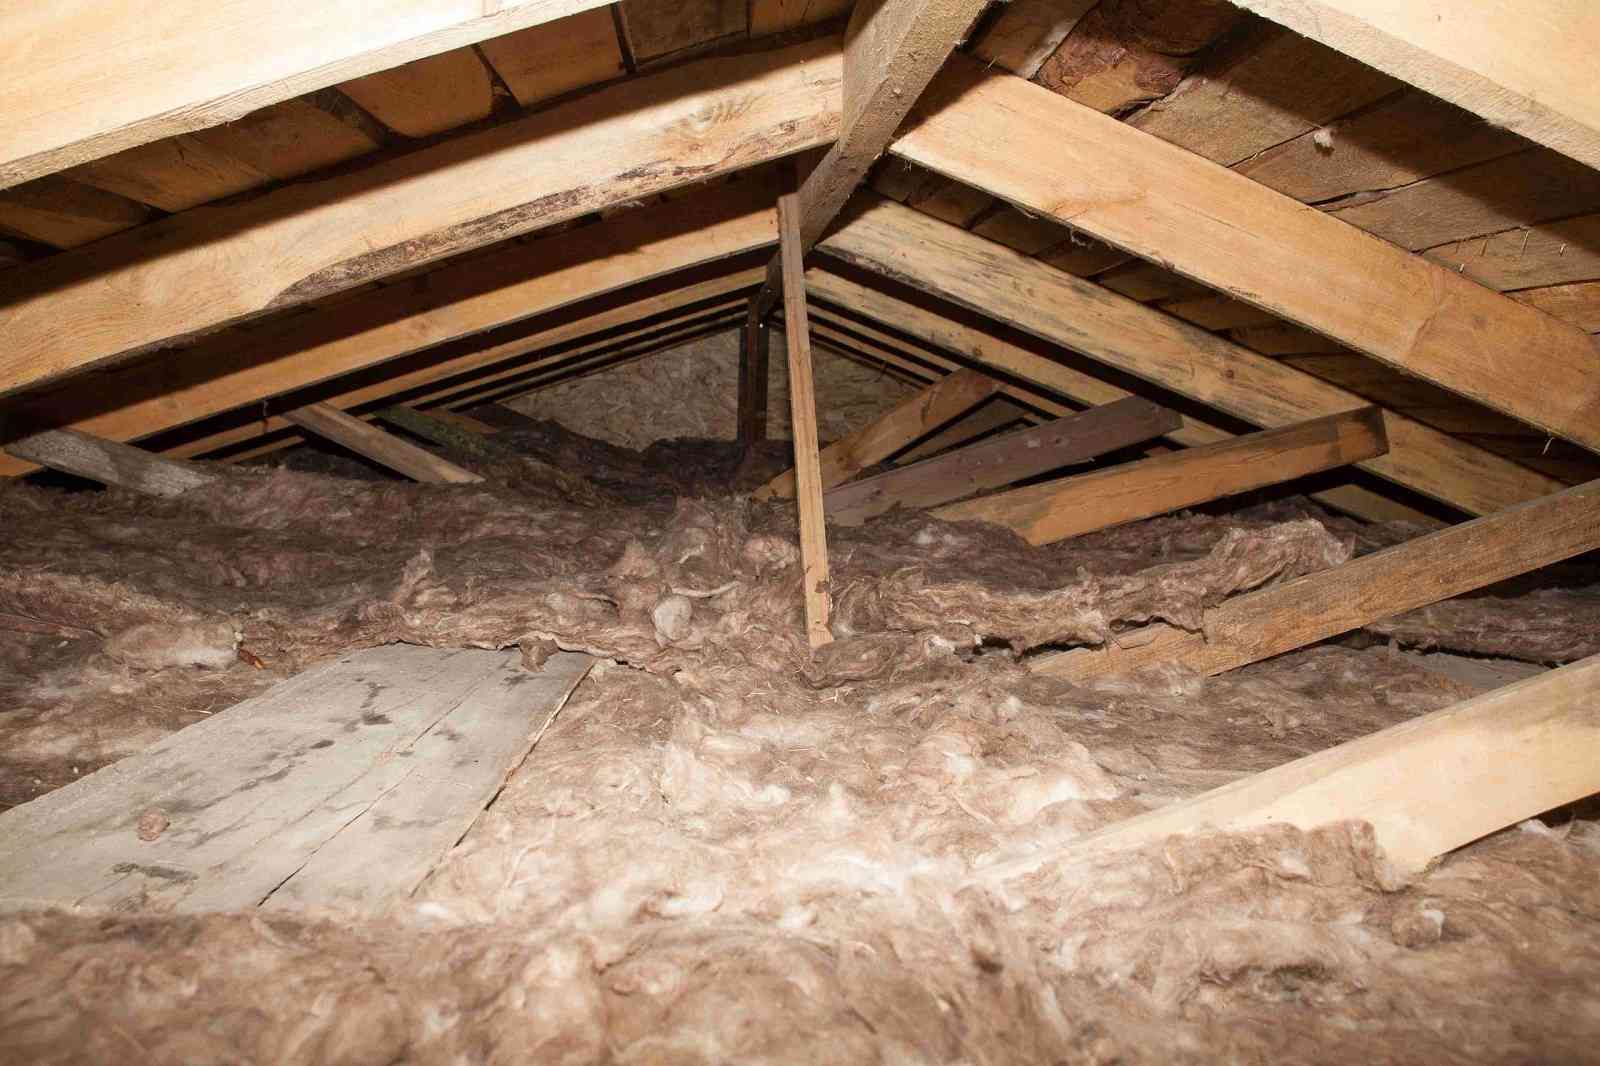 attic insulation and roof rafters